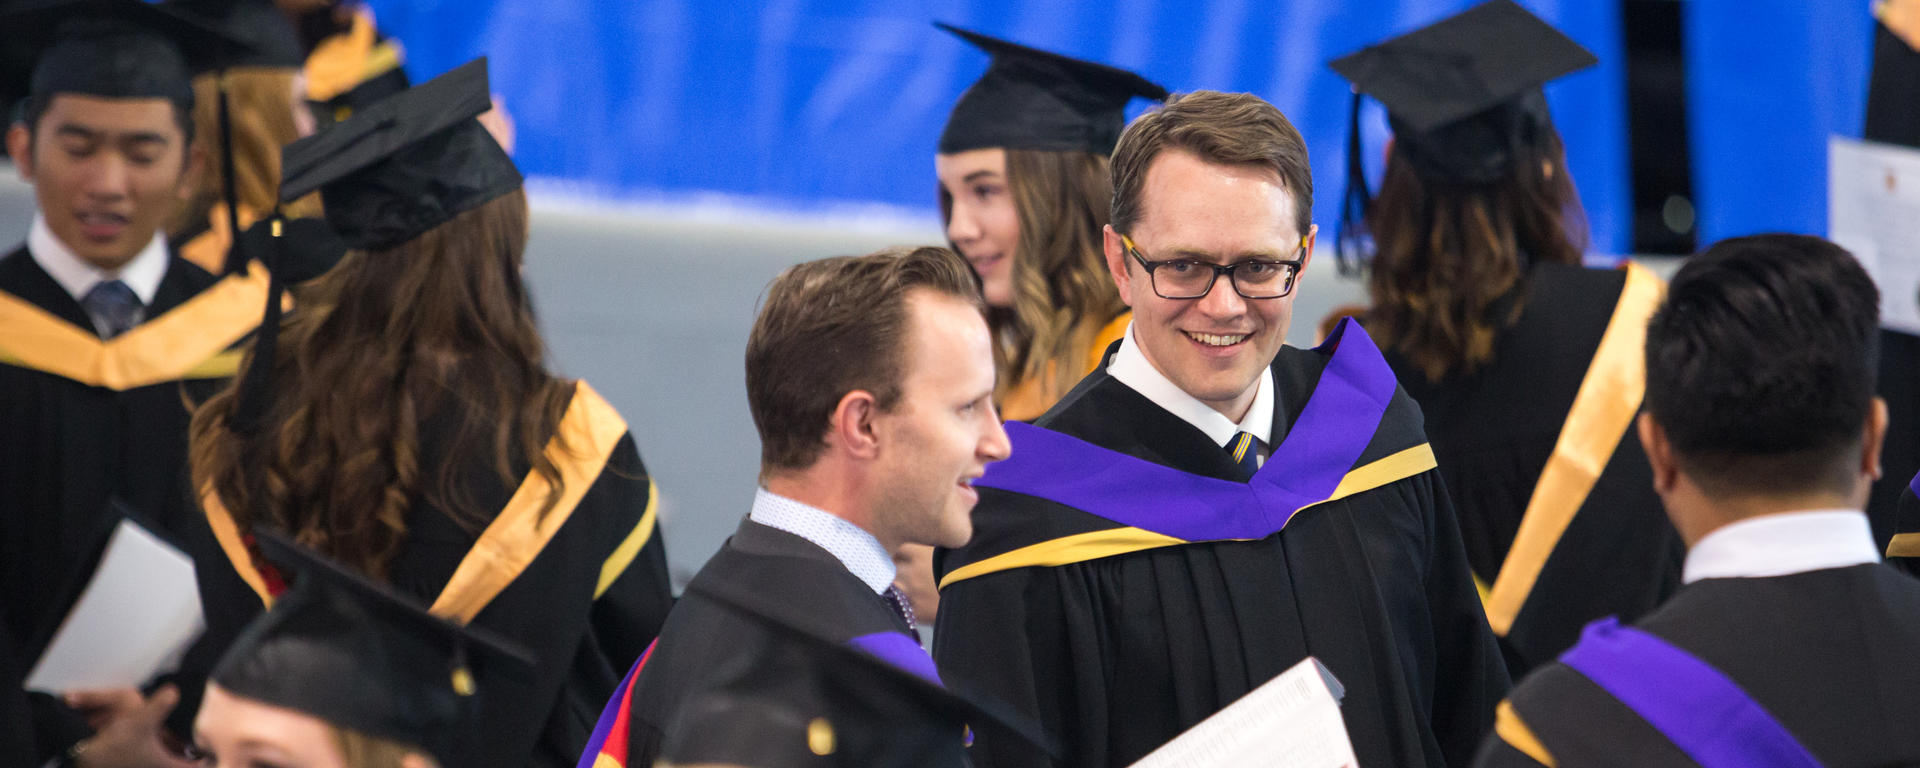 Law school graduates chat in the Olympic Oval prior to convocation ceremonies